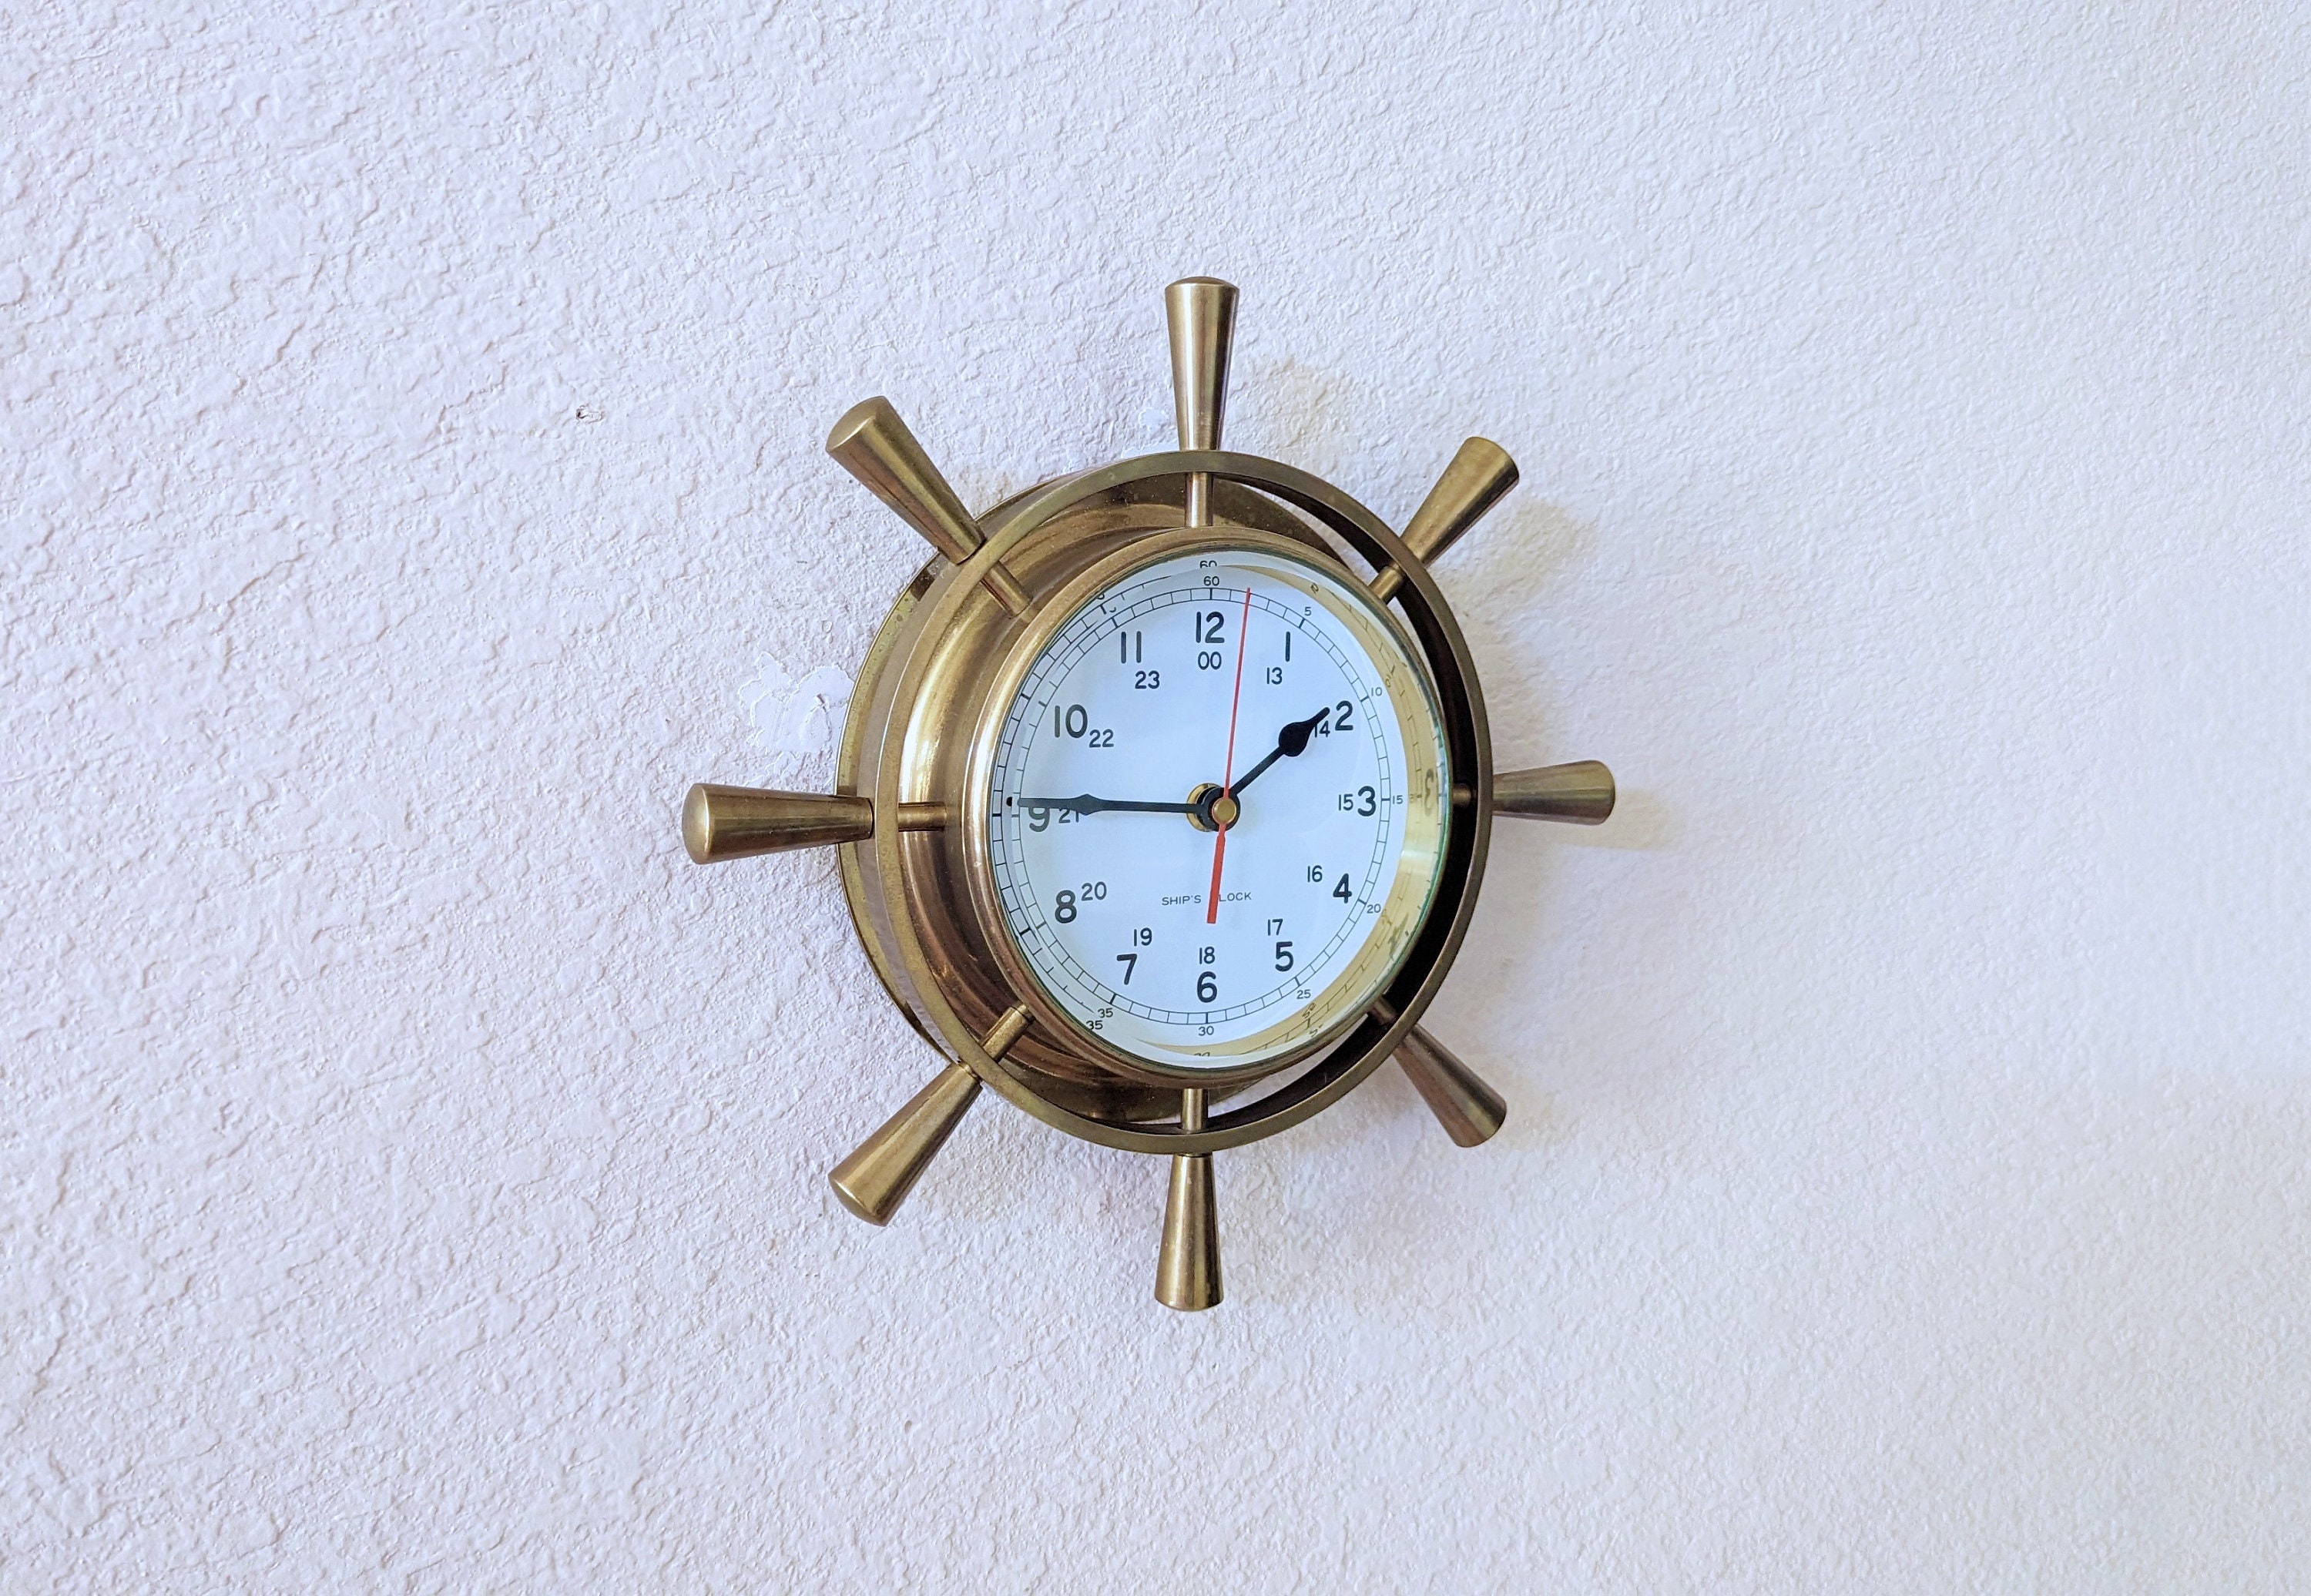 9 inch Antique Brass Nautical Porthole Clock with Franklin Murphy's Analog  Beautiful Clock Face Maritime Decor Antique Brass Best for Gift Home Office